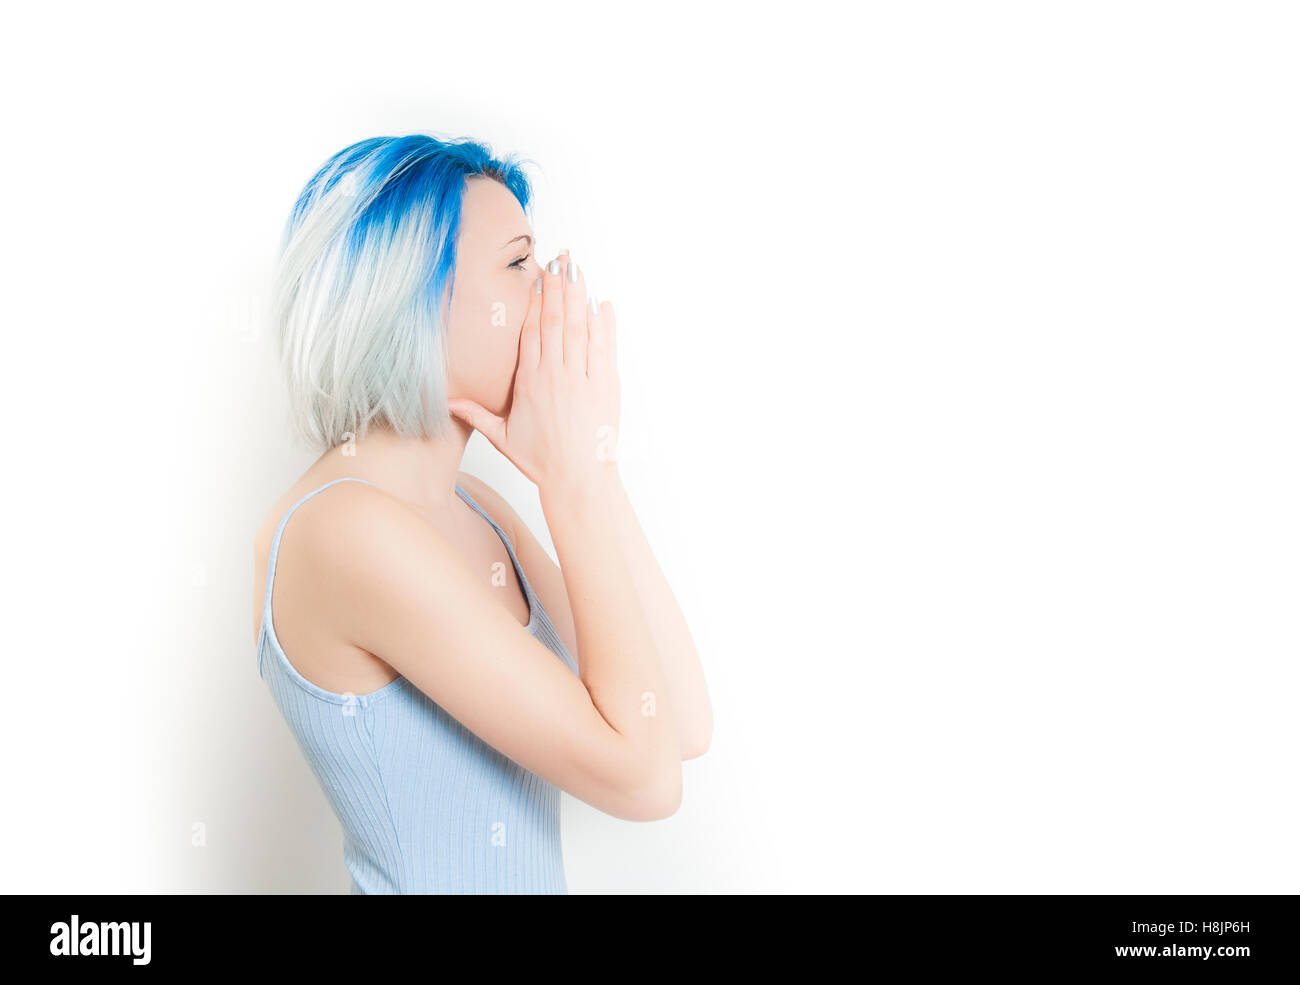 Young teen woman hipster style and blue hair profile screaming with hands on face, isolated on white Stock Photo